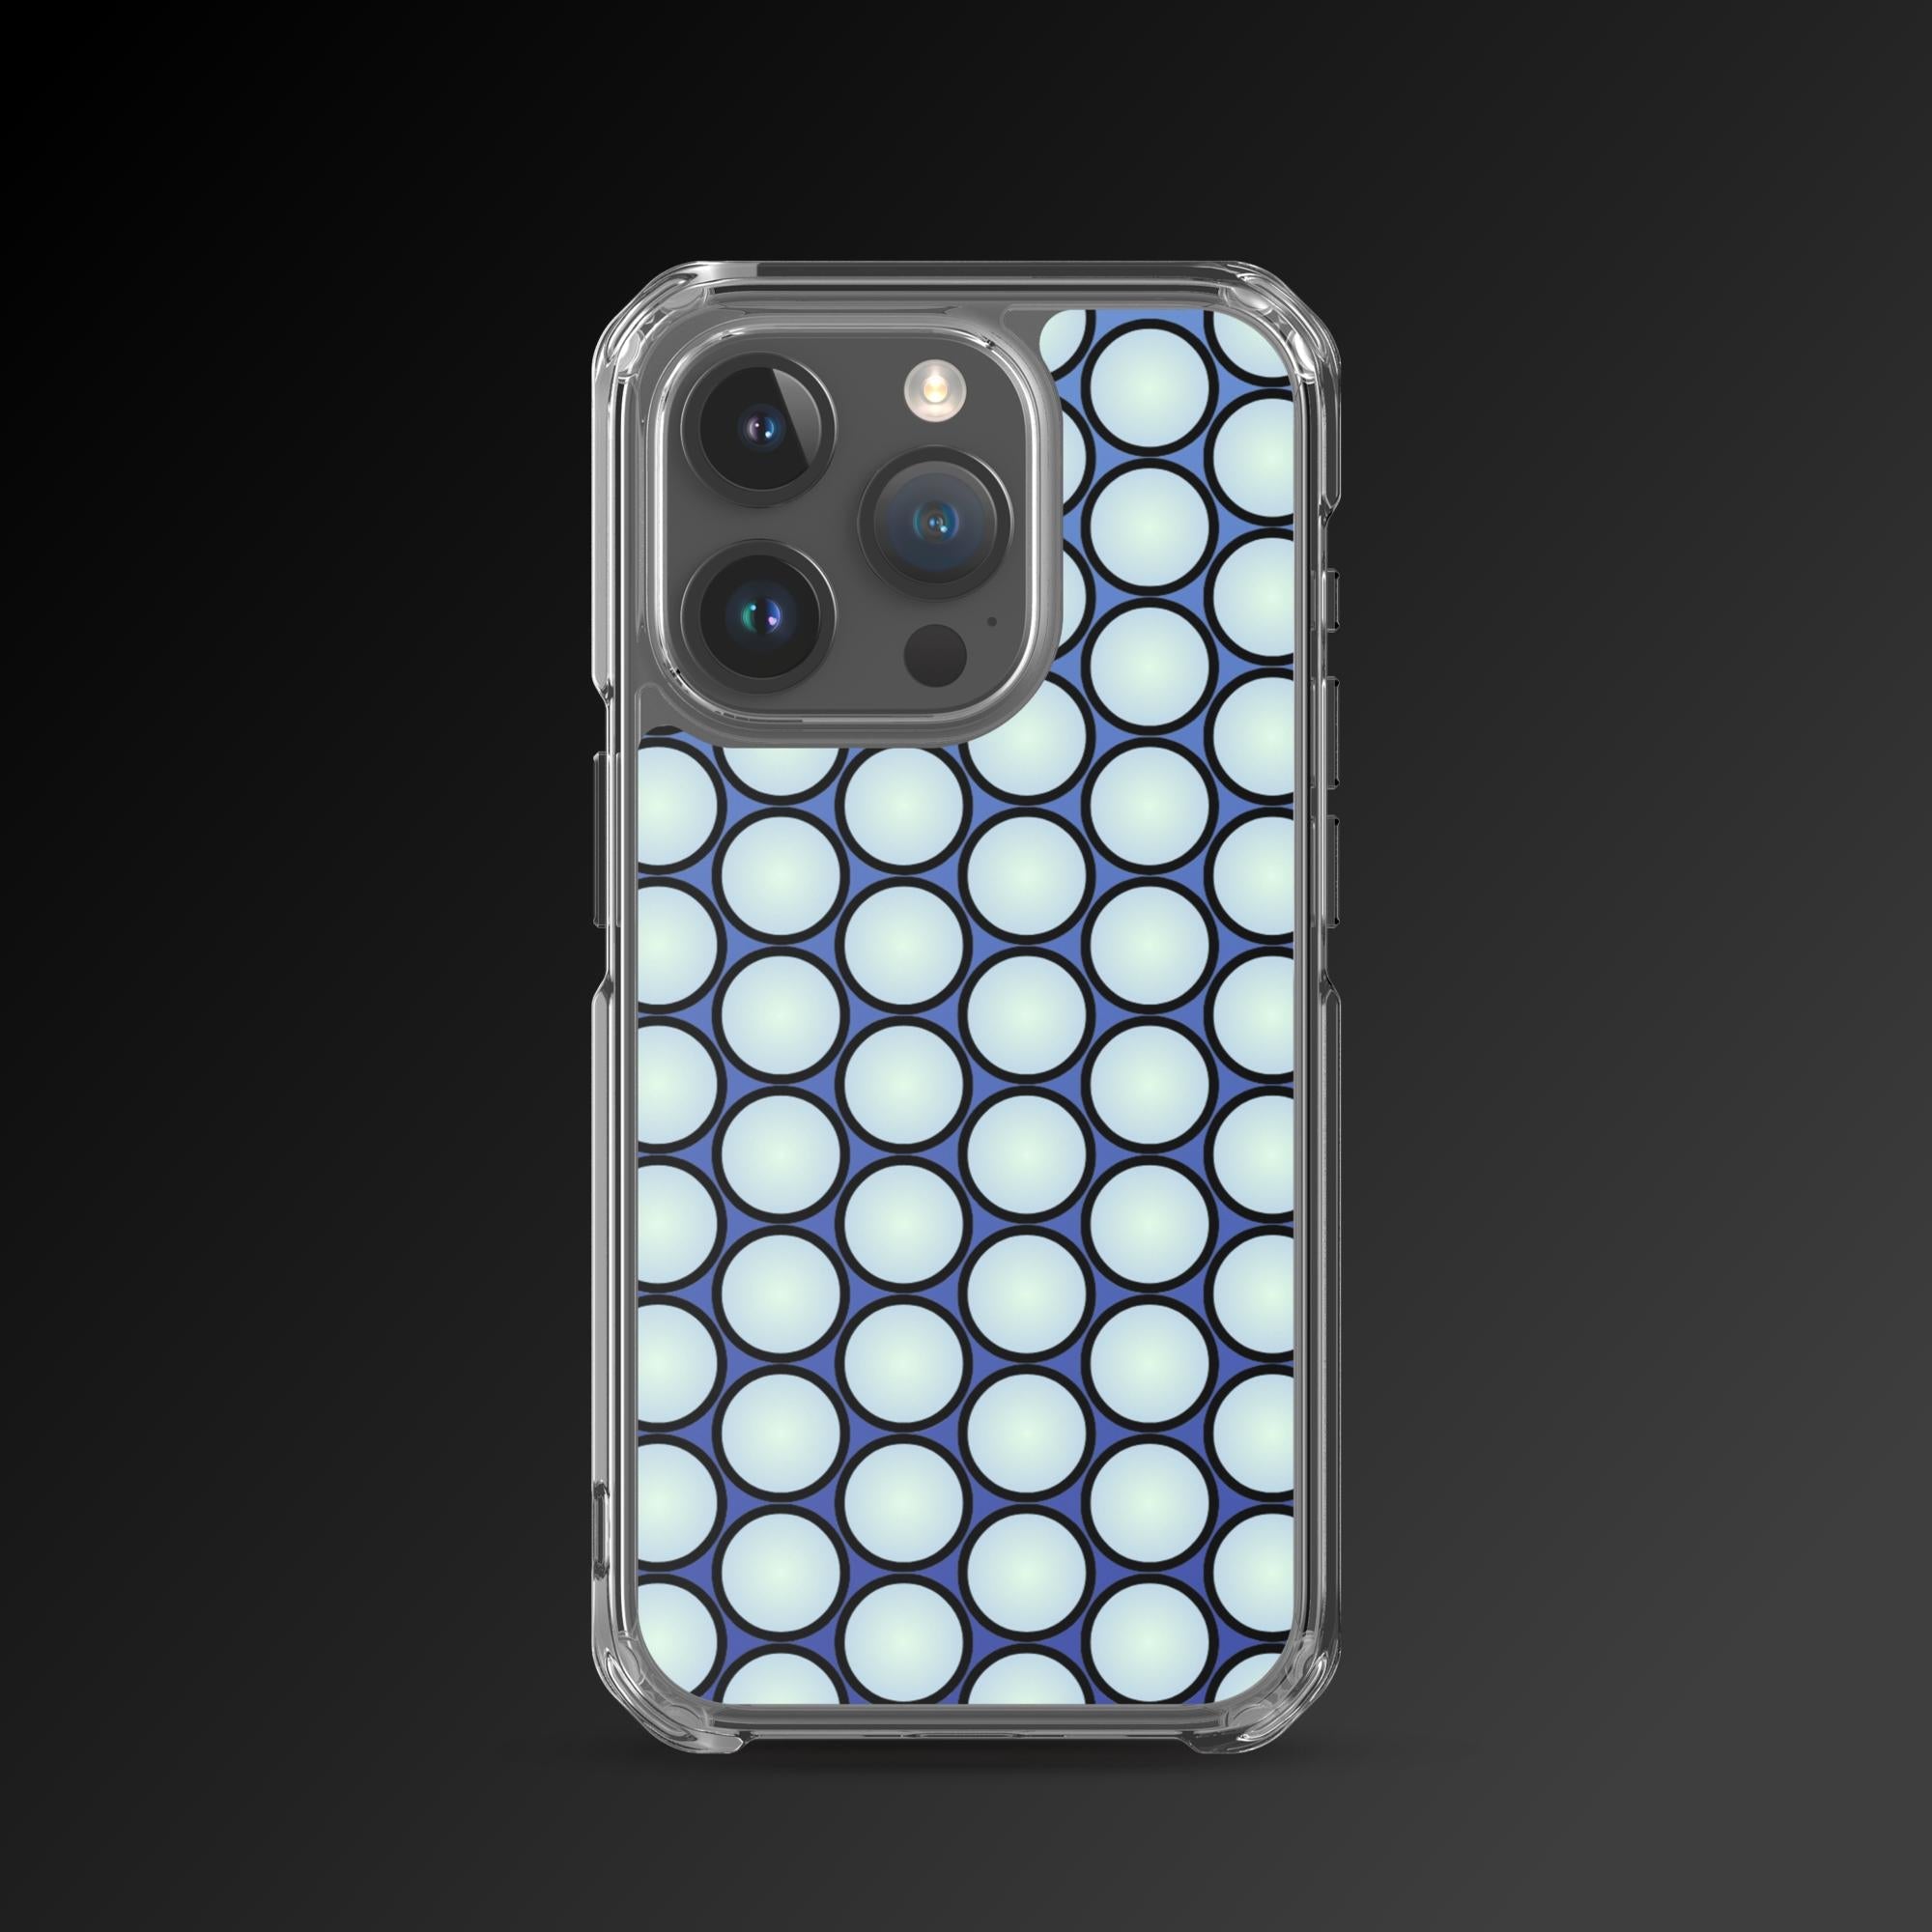 "White circle grid" clear iphone case - Clear iphone case - Ever colorful